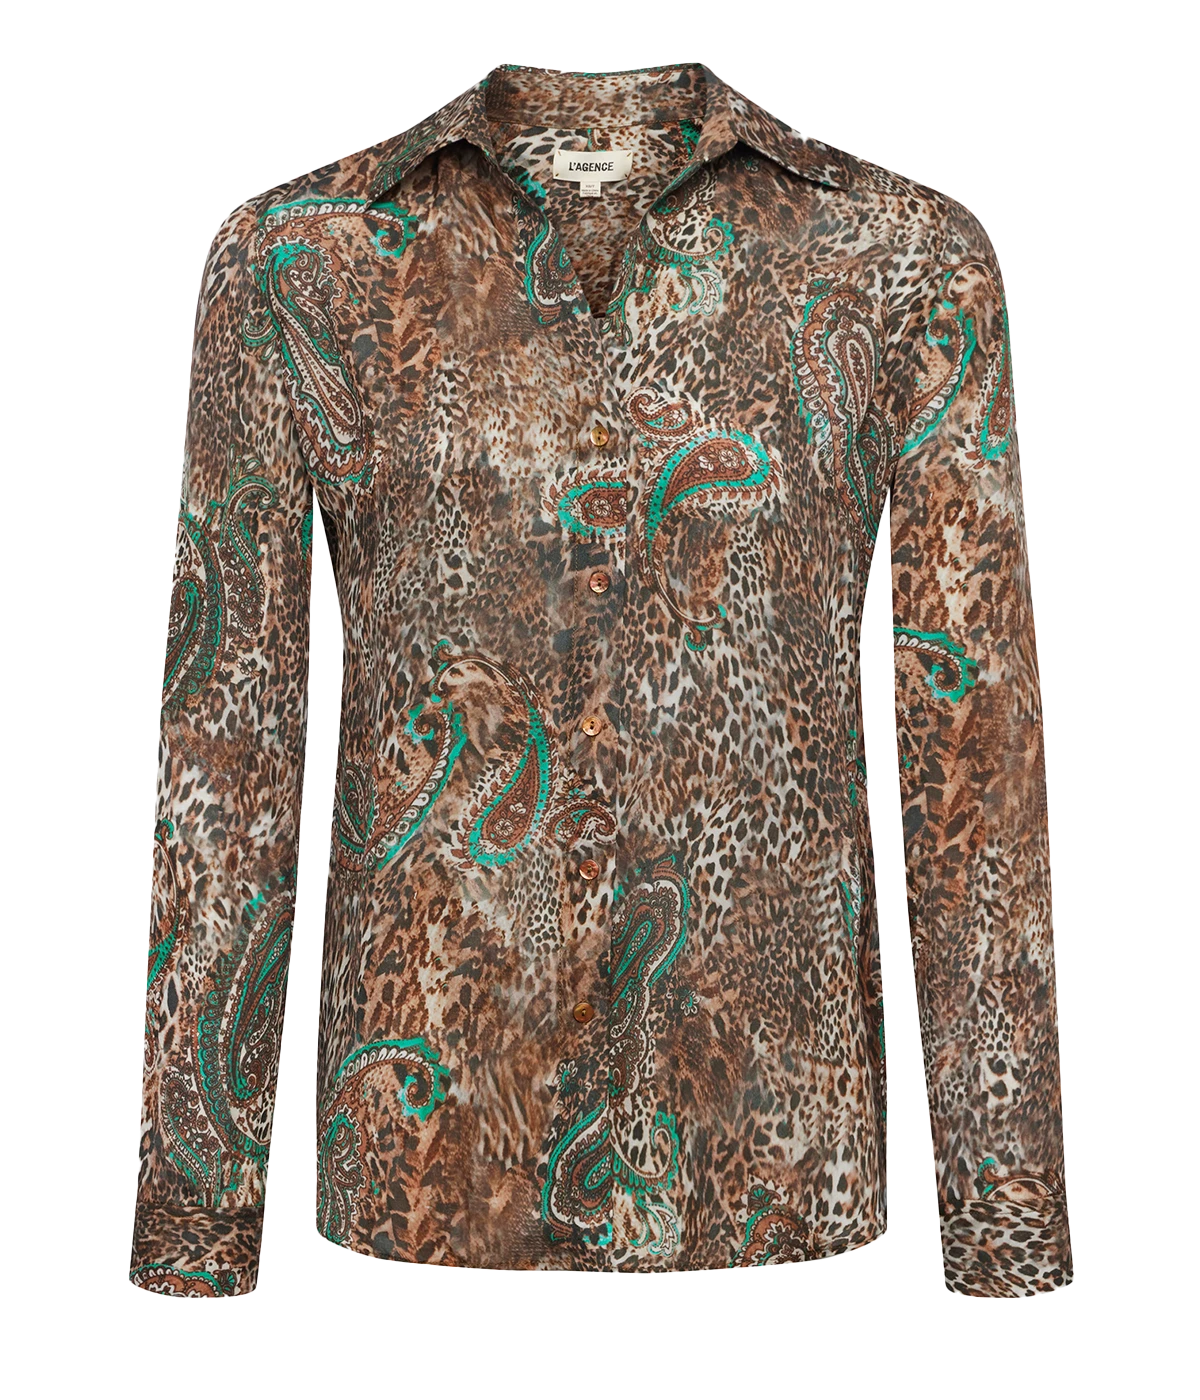 A classic long sleeve button up shirt, in a leopard print, with green paisley detailing. With collar, long sleeve, 100% silk, Bra friendly, date night top, made in USA. 